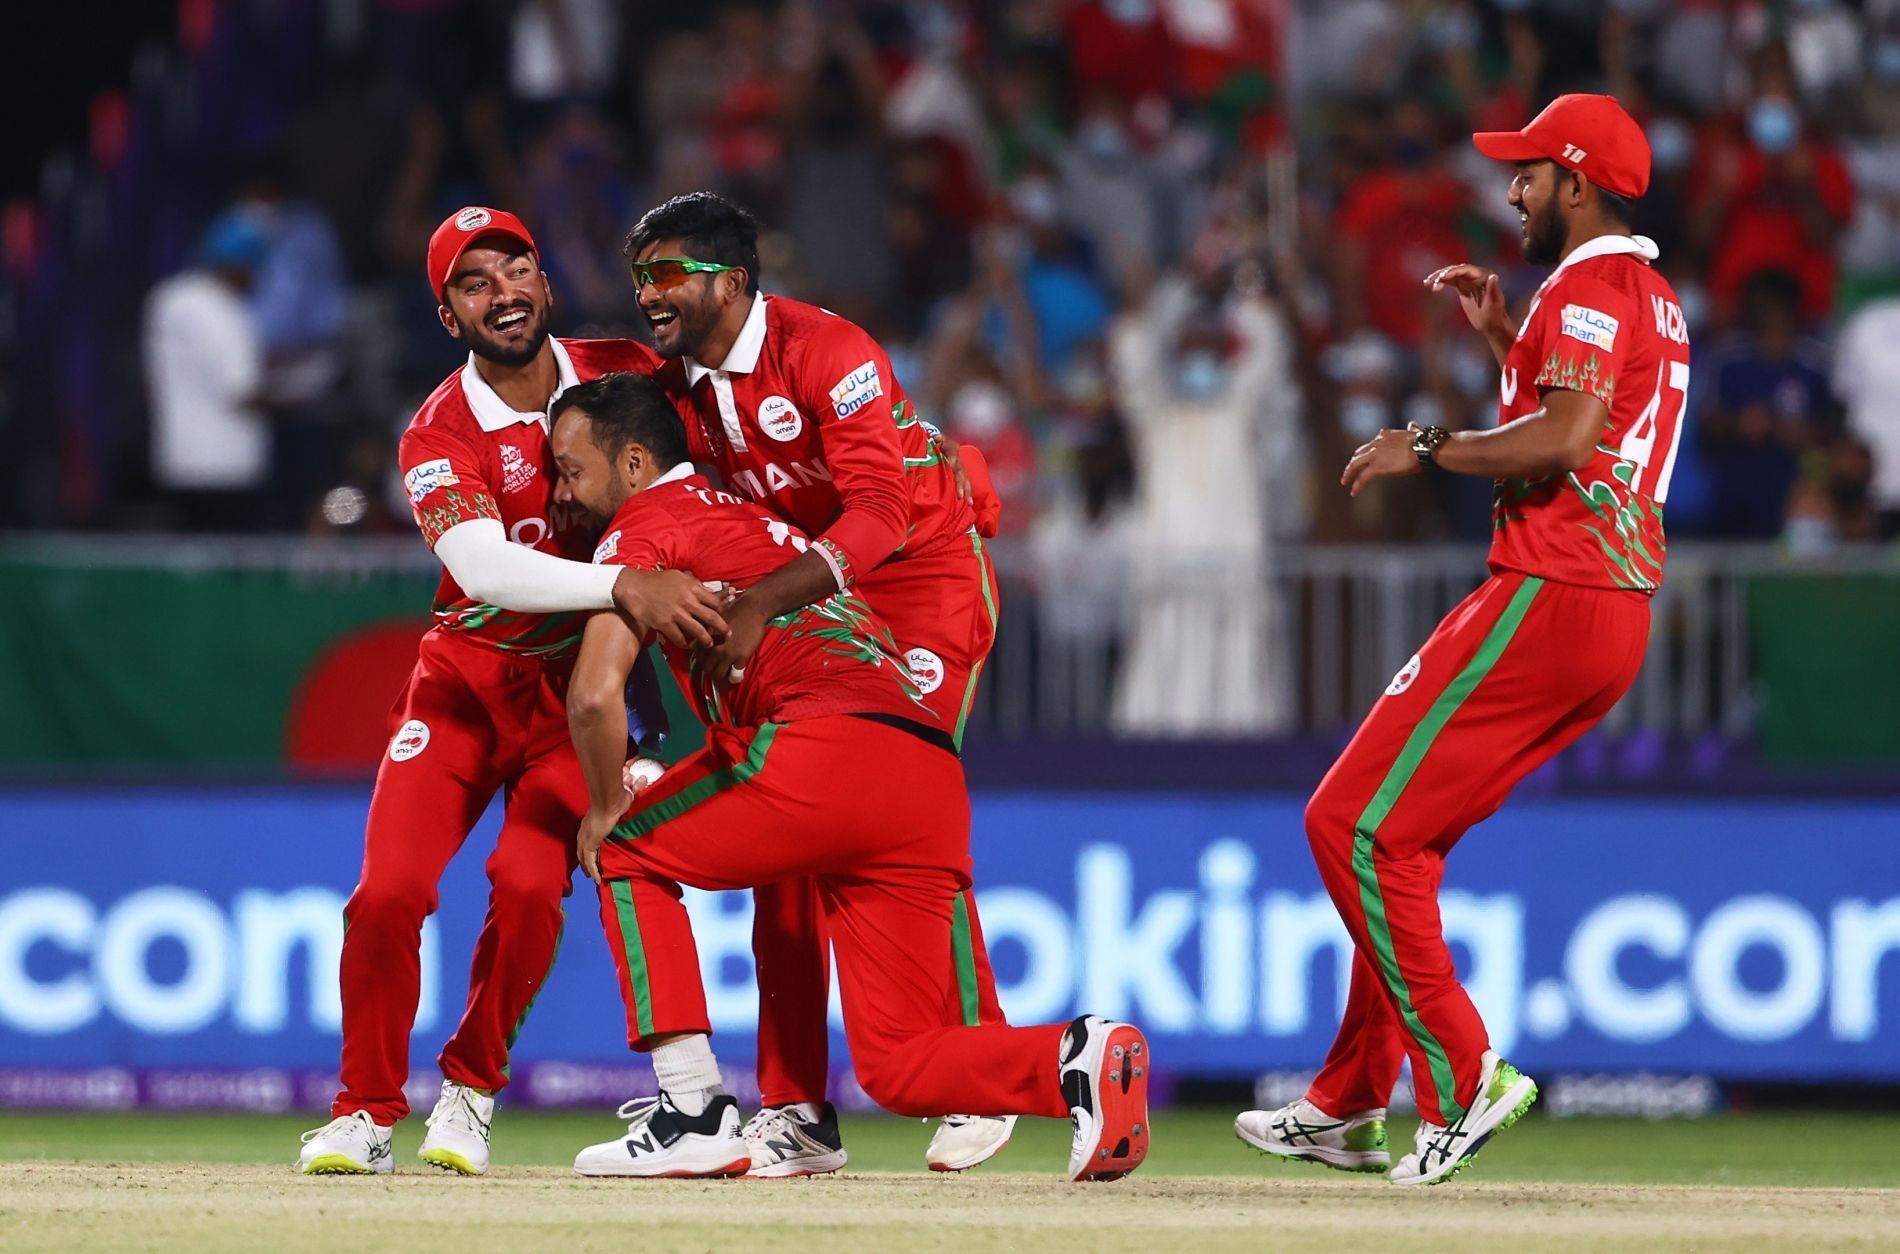 Oman bowlers put up a fighting effort against Bangladesh. Pic: T20WorldCup/ Twitter